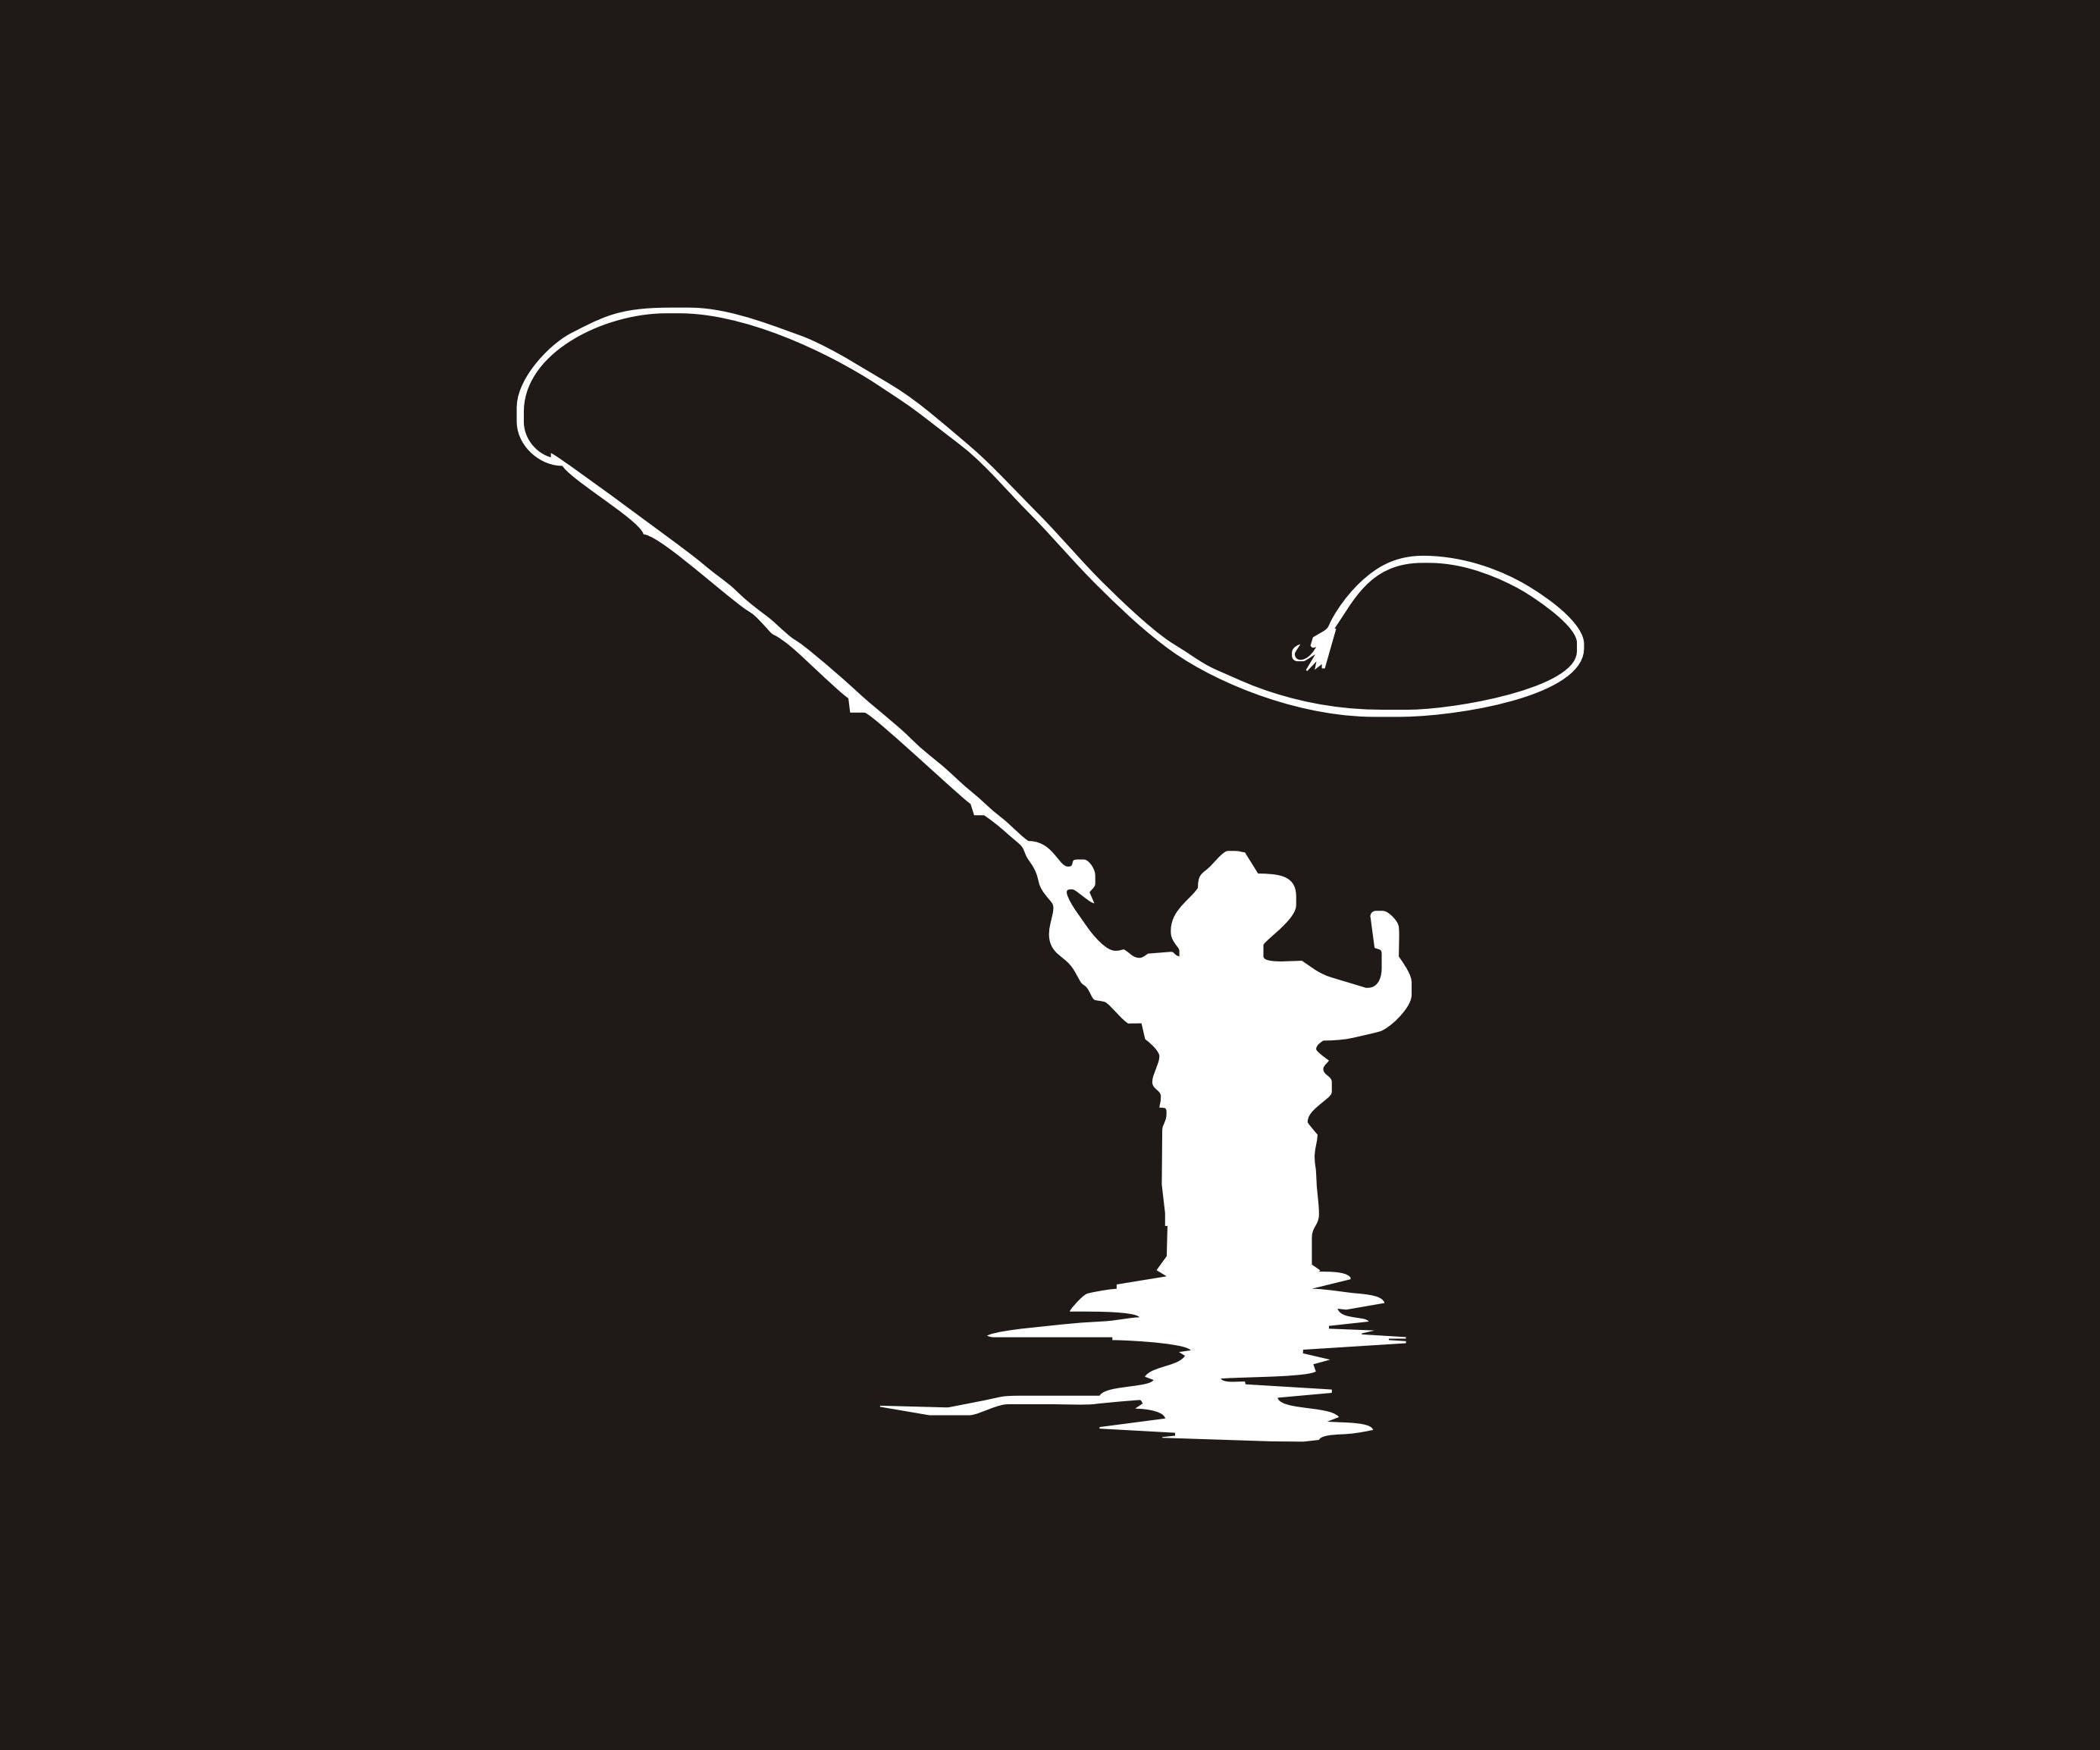 lures sticker lines Fly fishing fisherman I vinyl decal Angling decal 